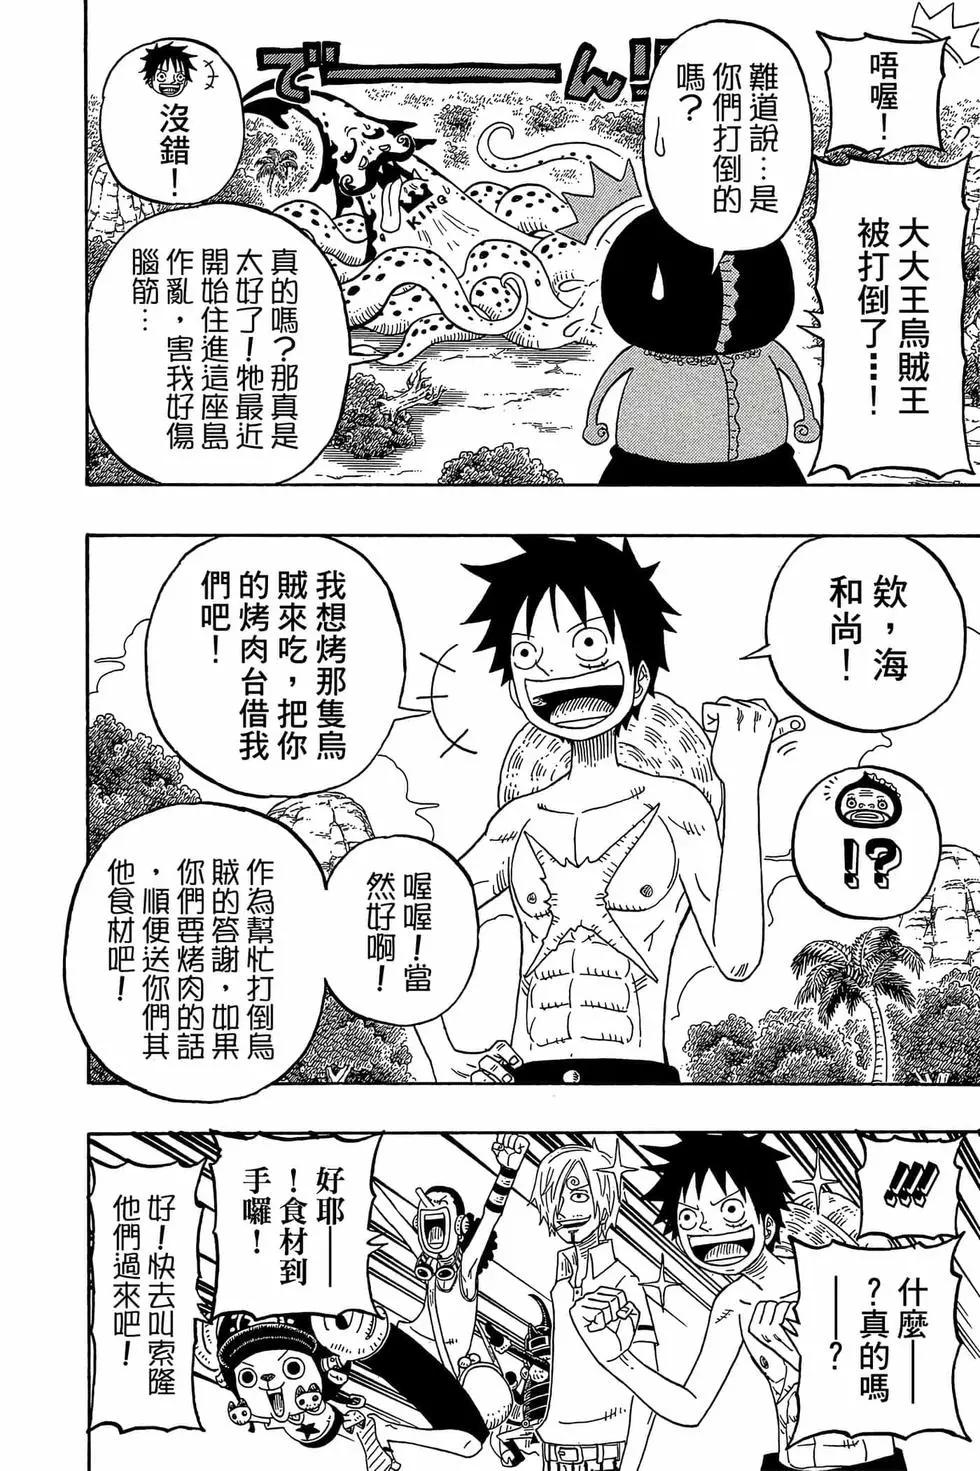 One piece party - 第03卷(3/4) - 3